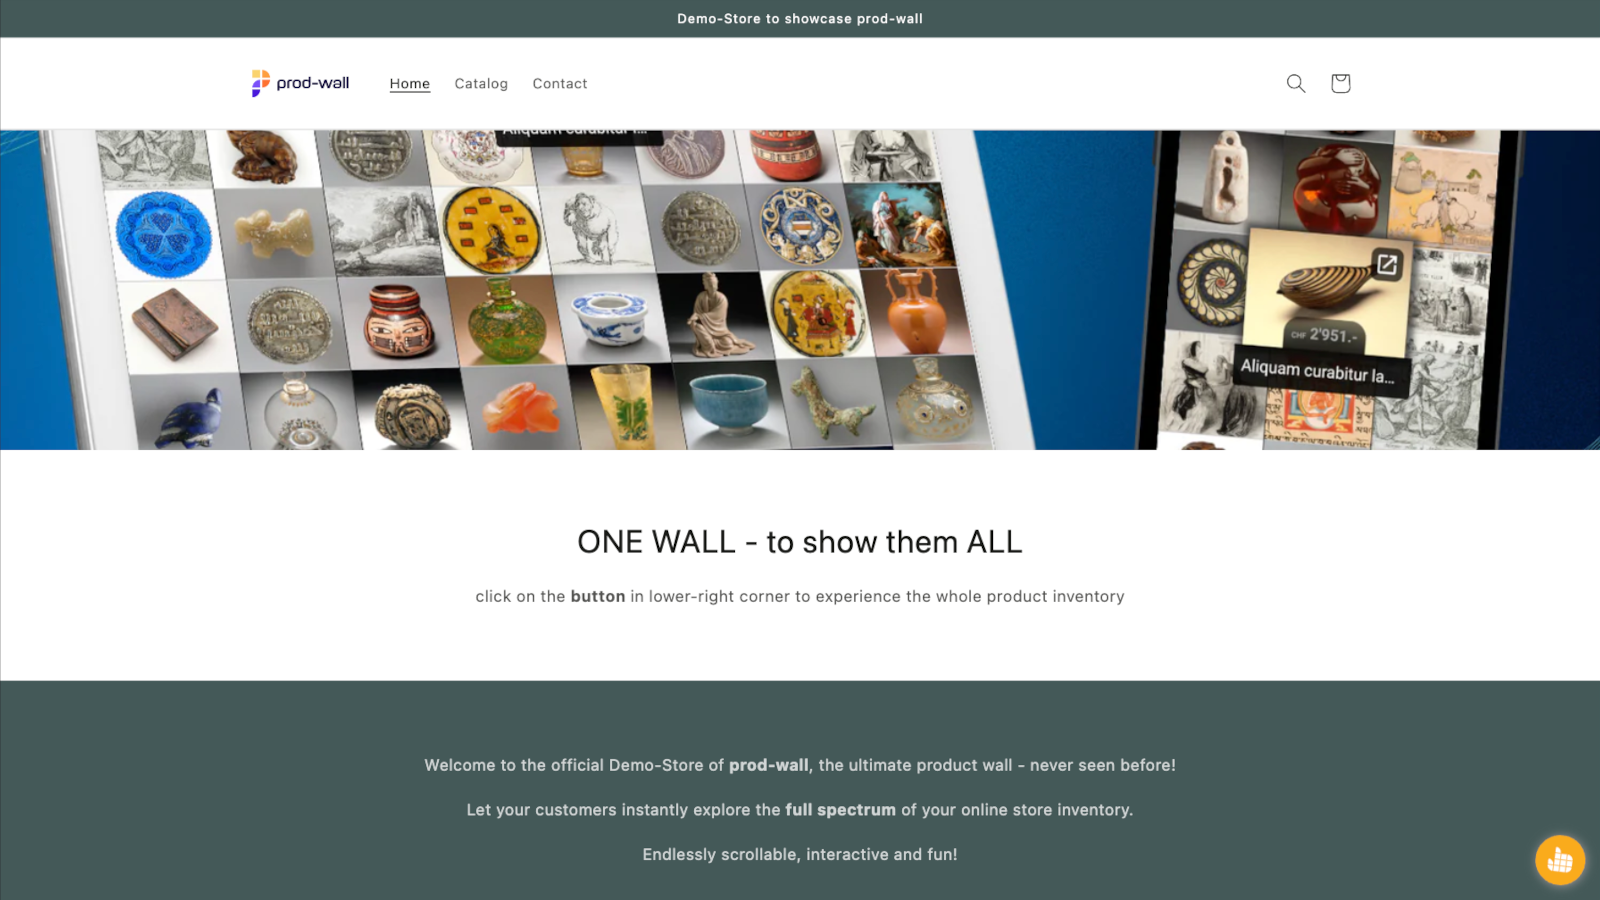 prod-wall offers a simple launch button for your storefront